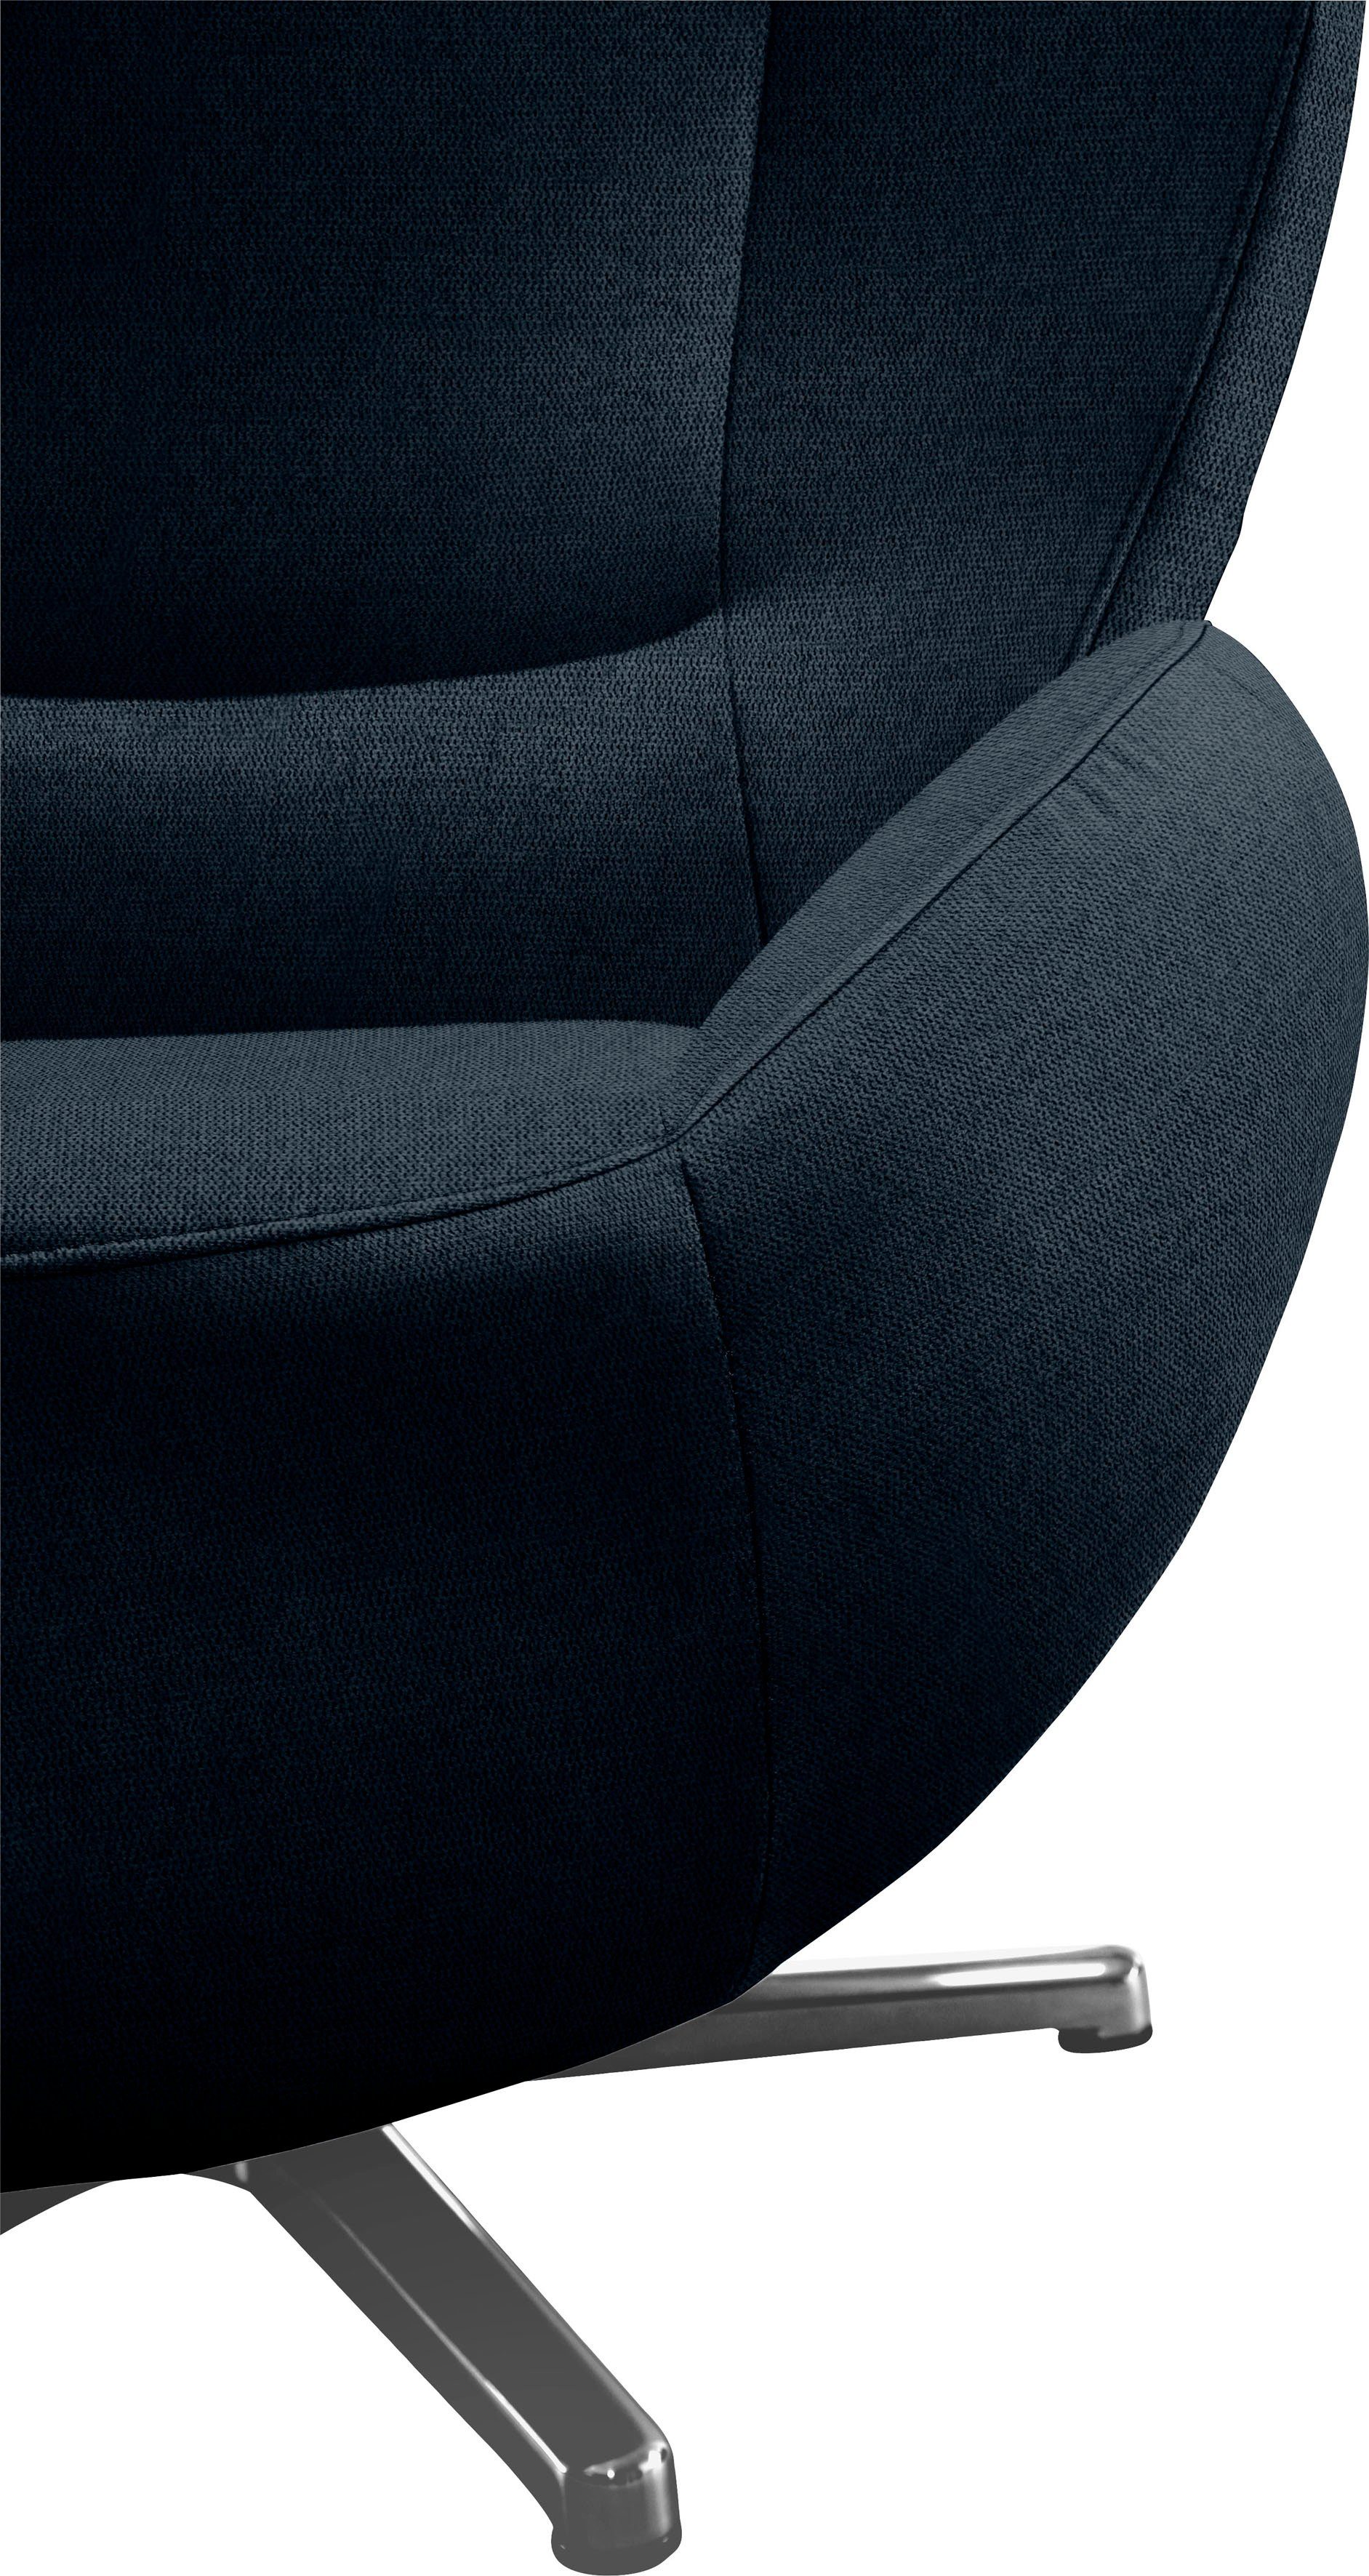 HOME TAILOR mit Loungesessel Chrom Metall-Drehfuß TOM TOM in PURE,